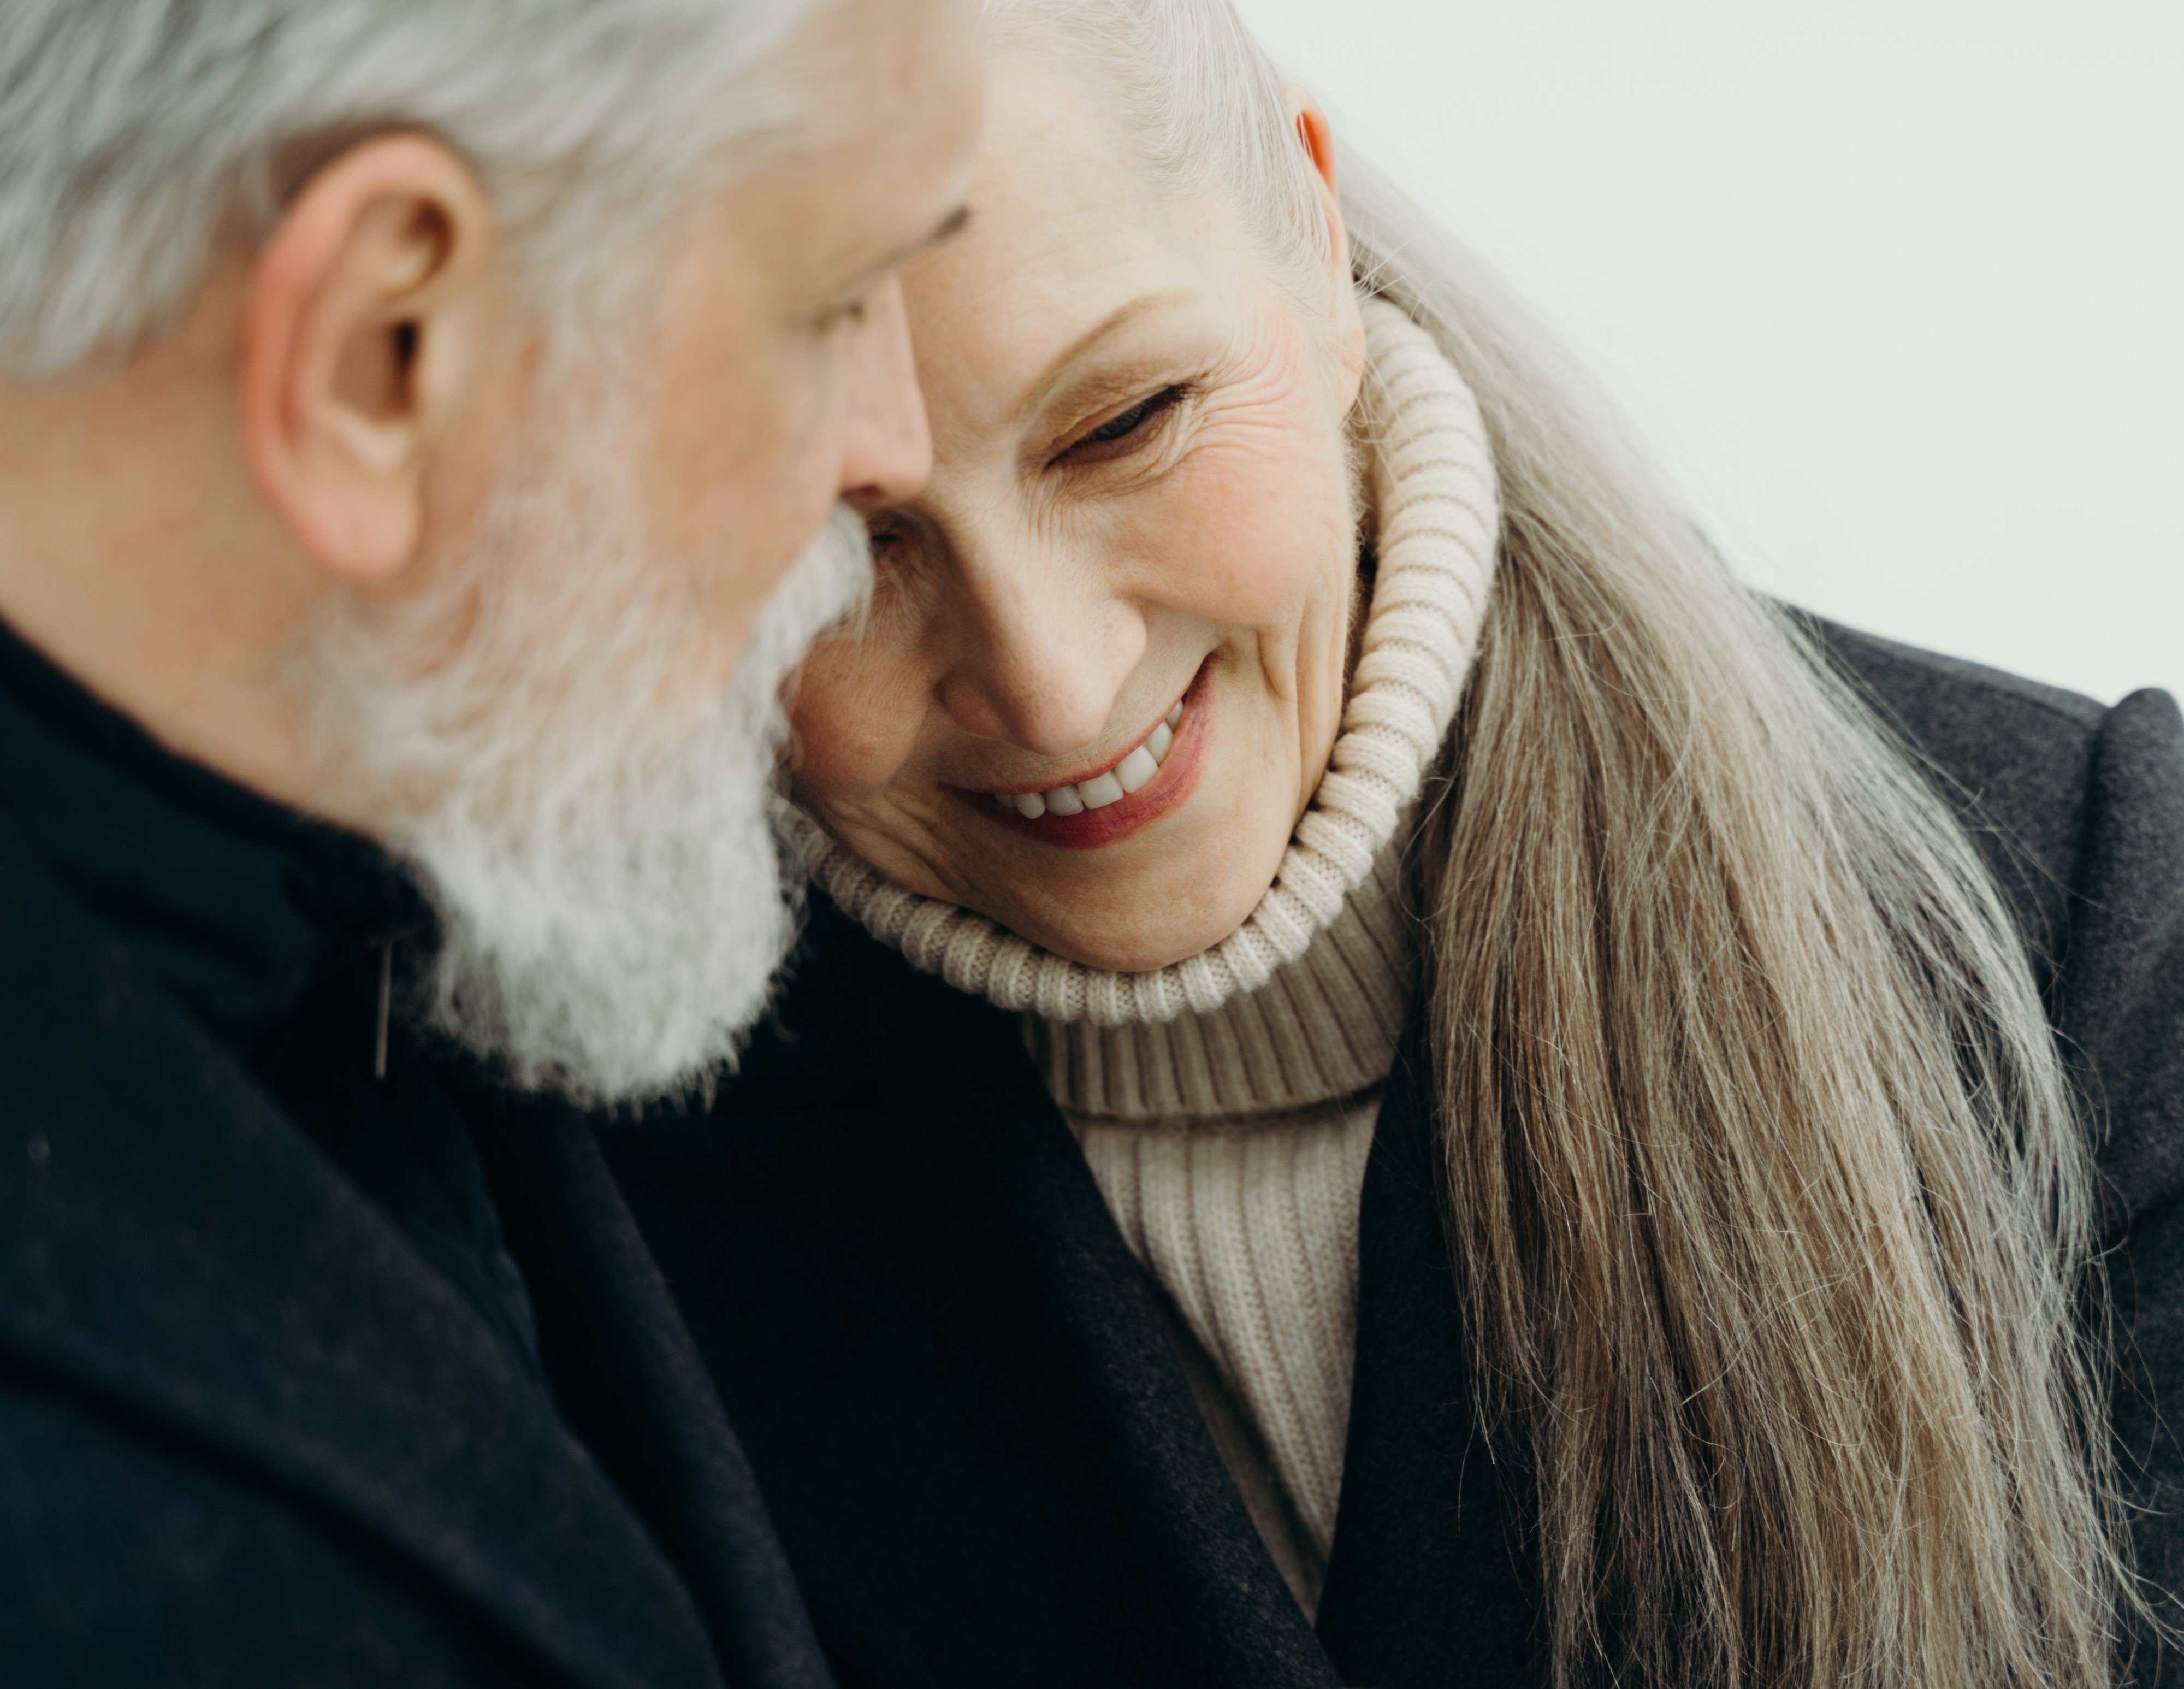 An elderly couple smiling. | Source: Pexels